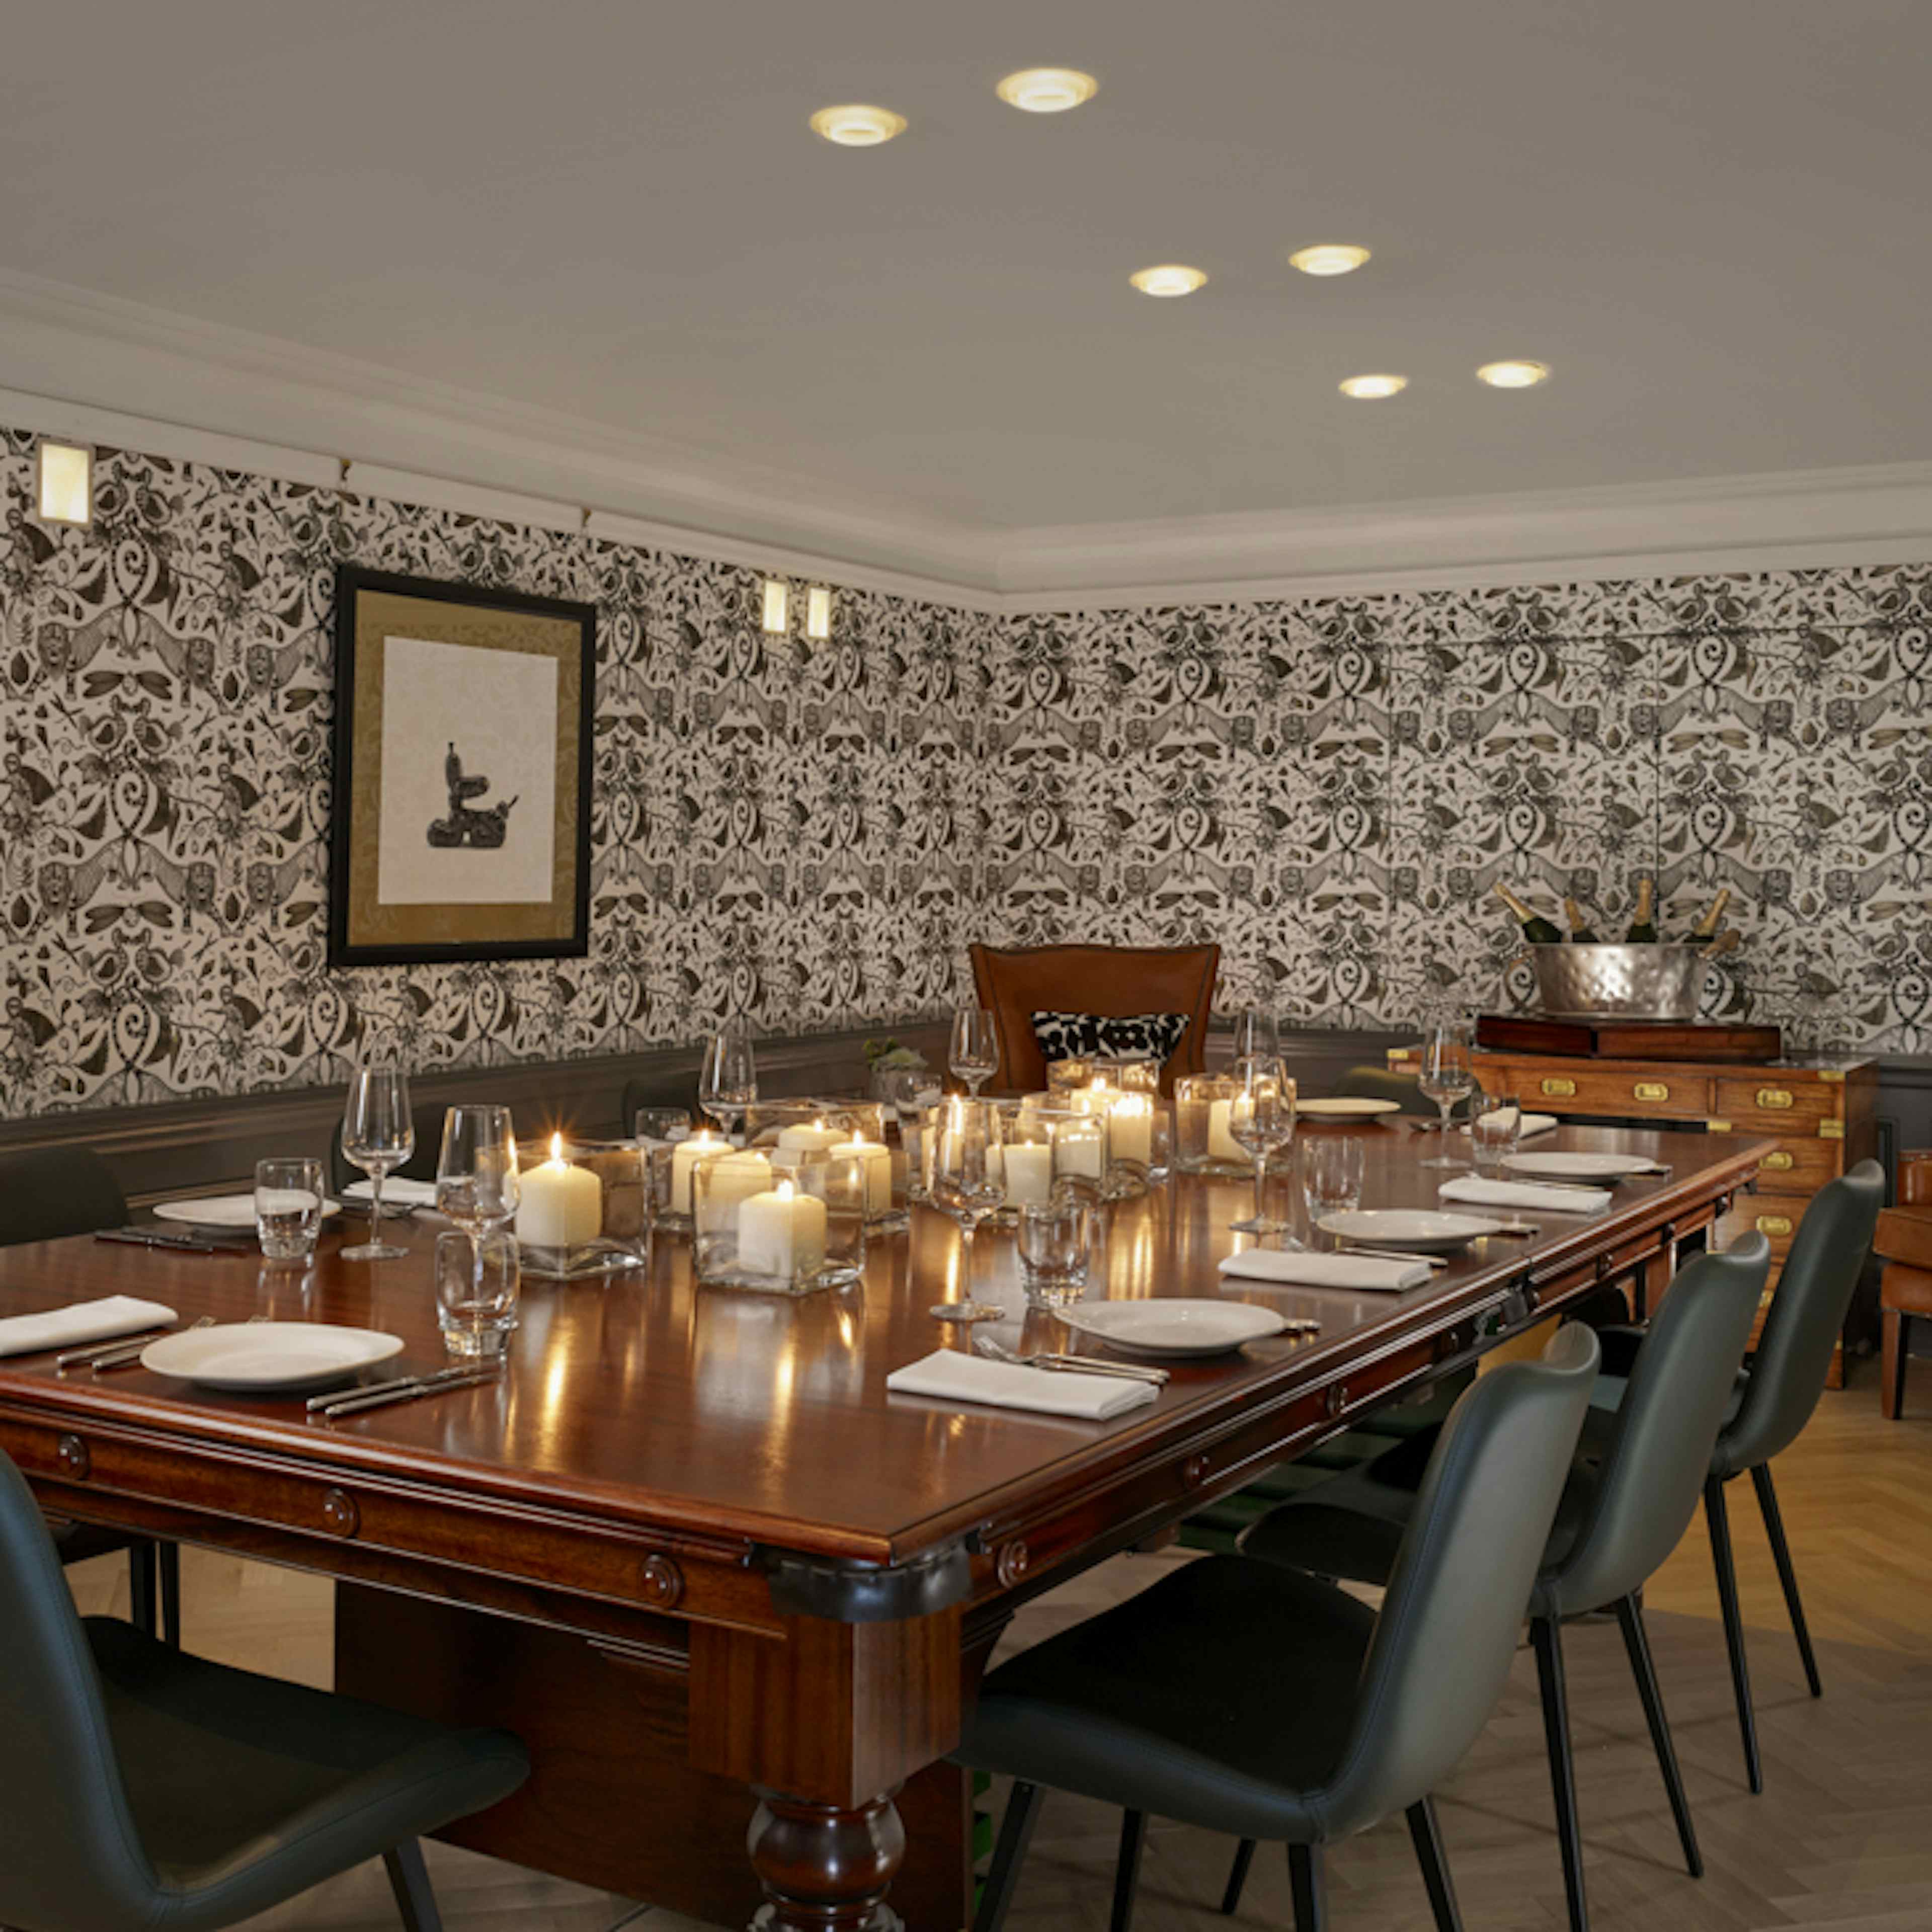 The Residence at Holmes Hotel London - The Residence image 3